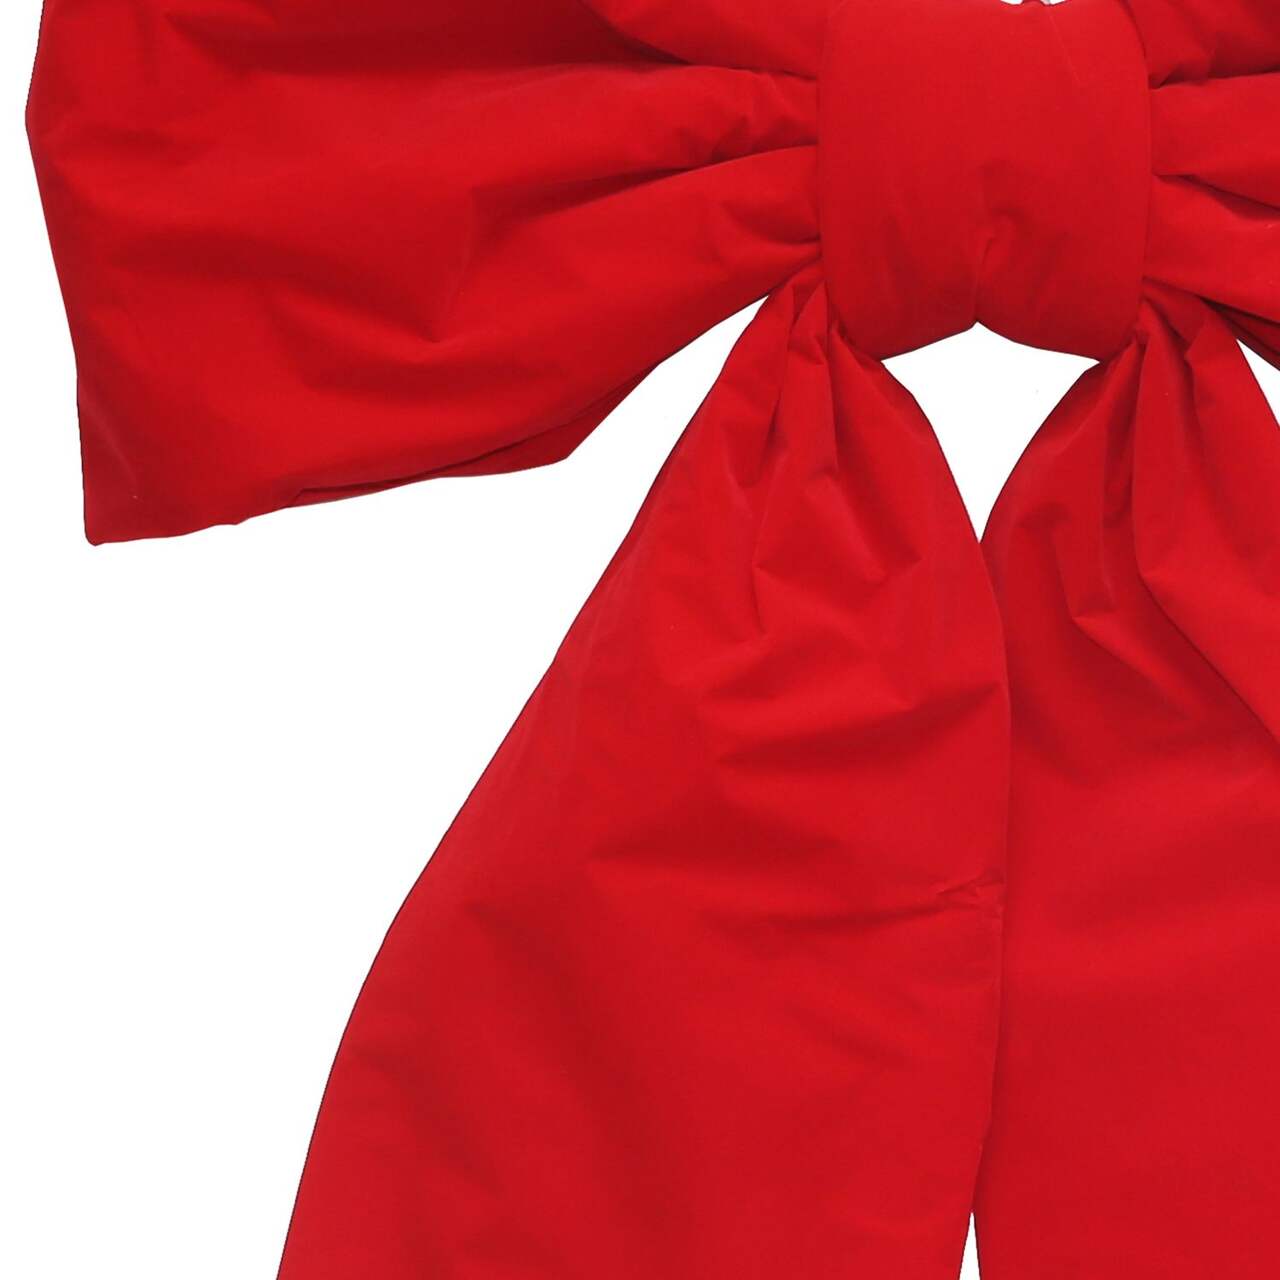 For Living Fabric Christmas Decoration Bow Large, Red, 48 x 6-in